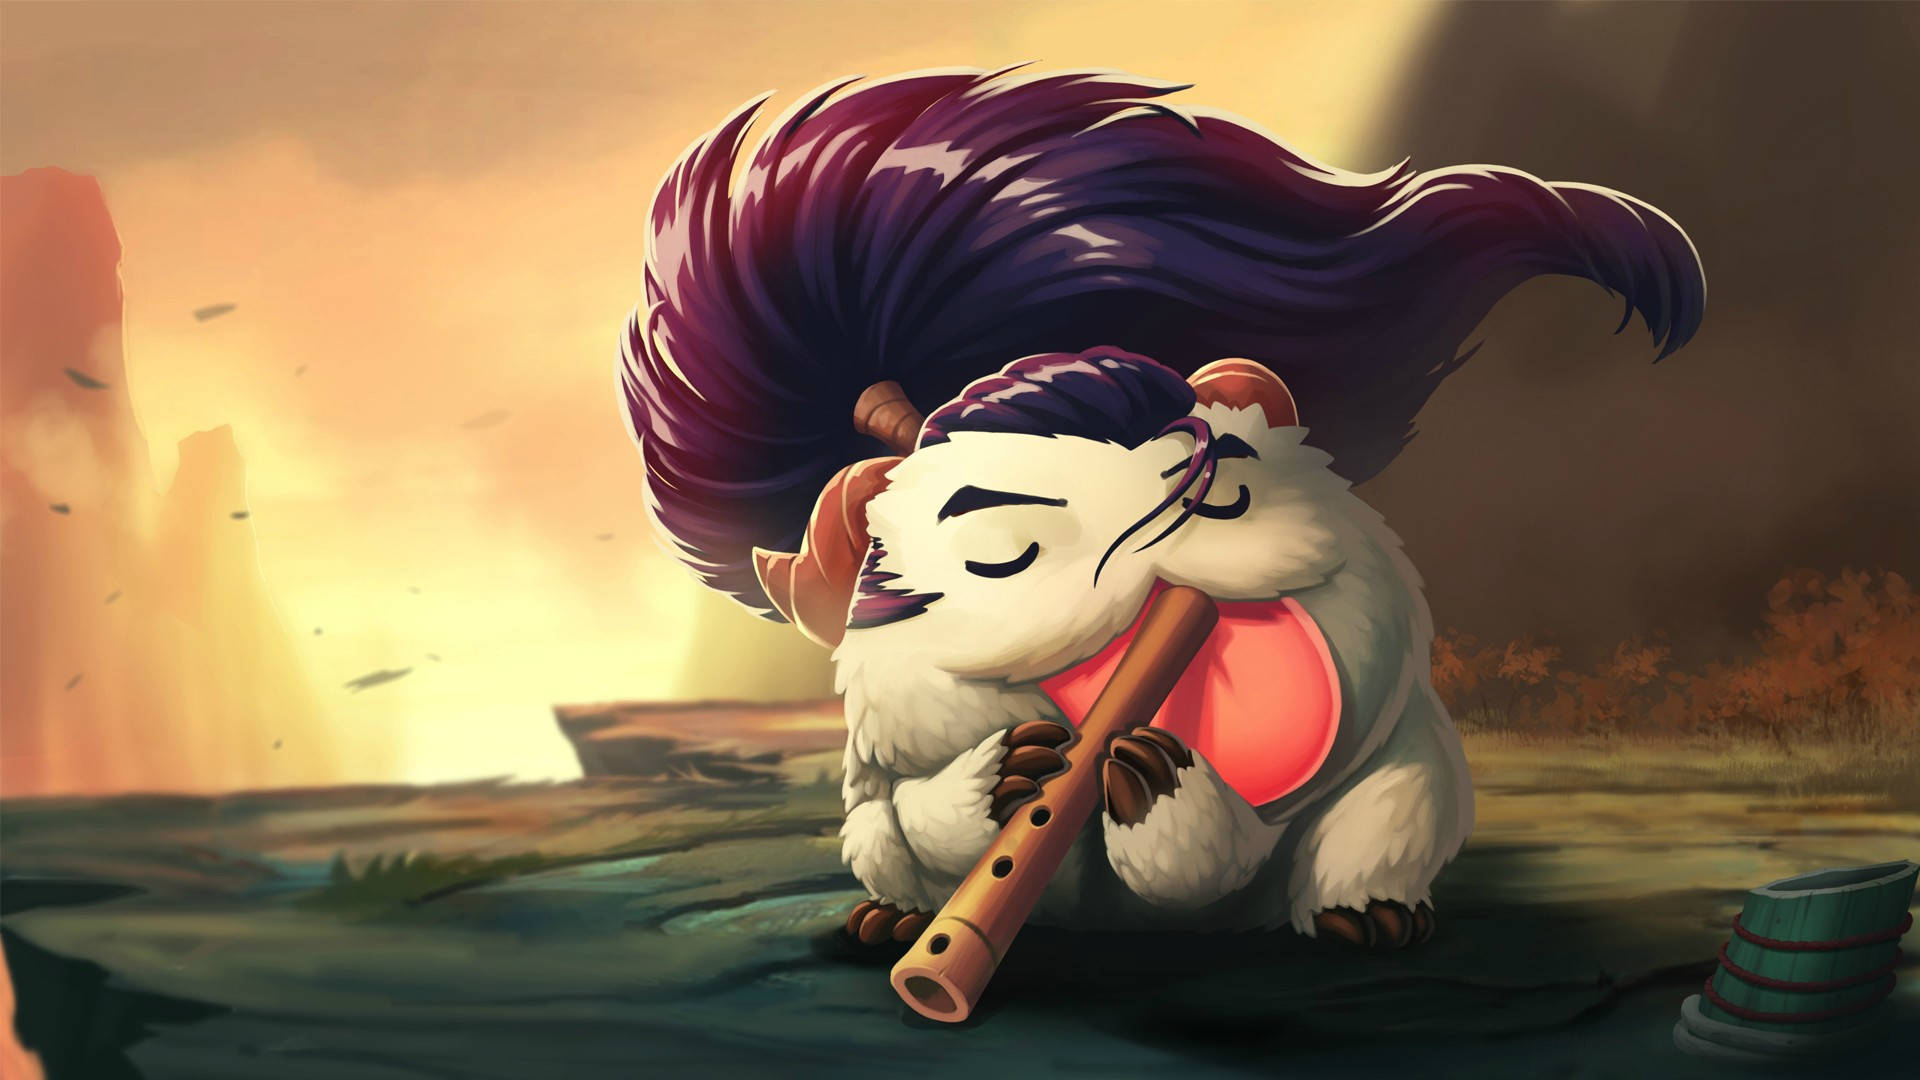 Live wallpaper Teemo in the sunset - LoL DOWNLOAD